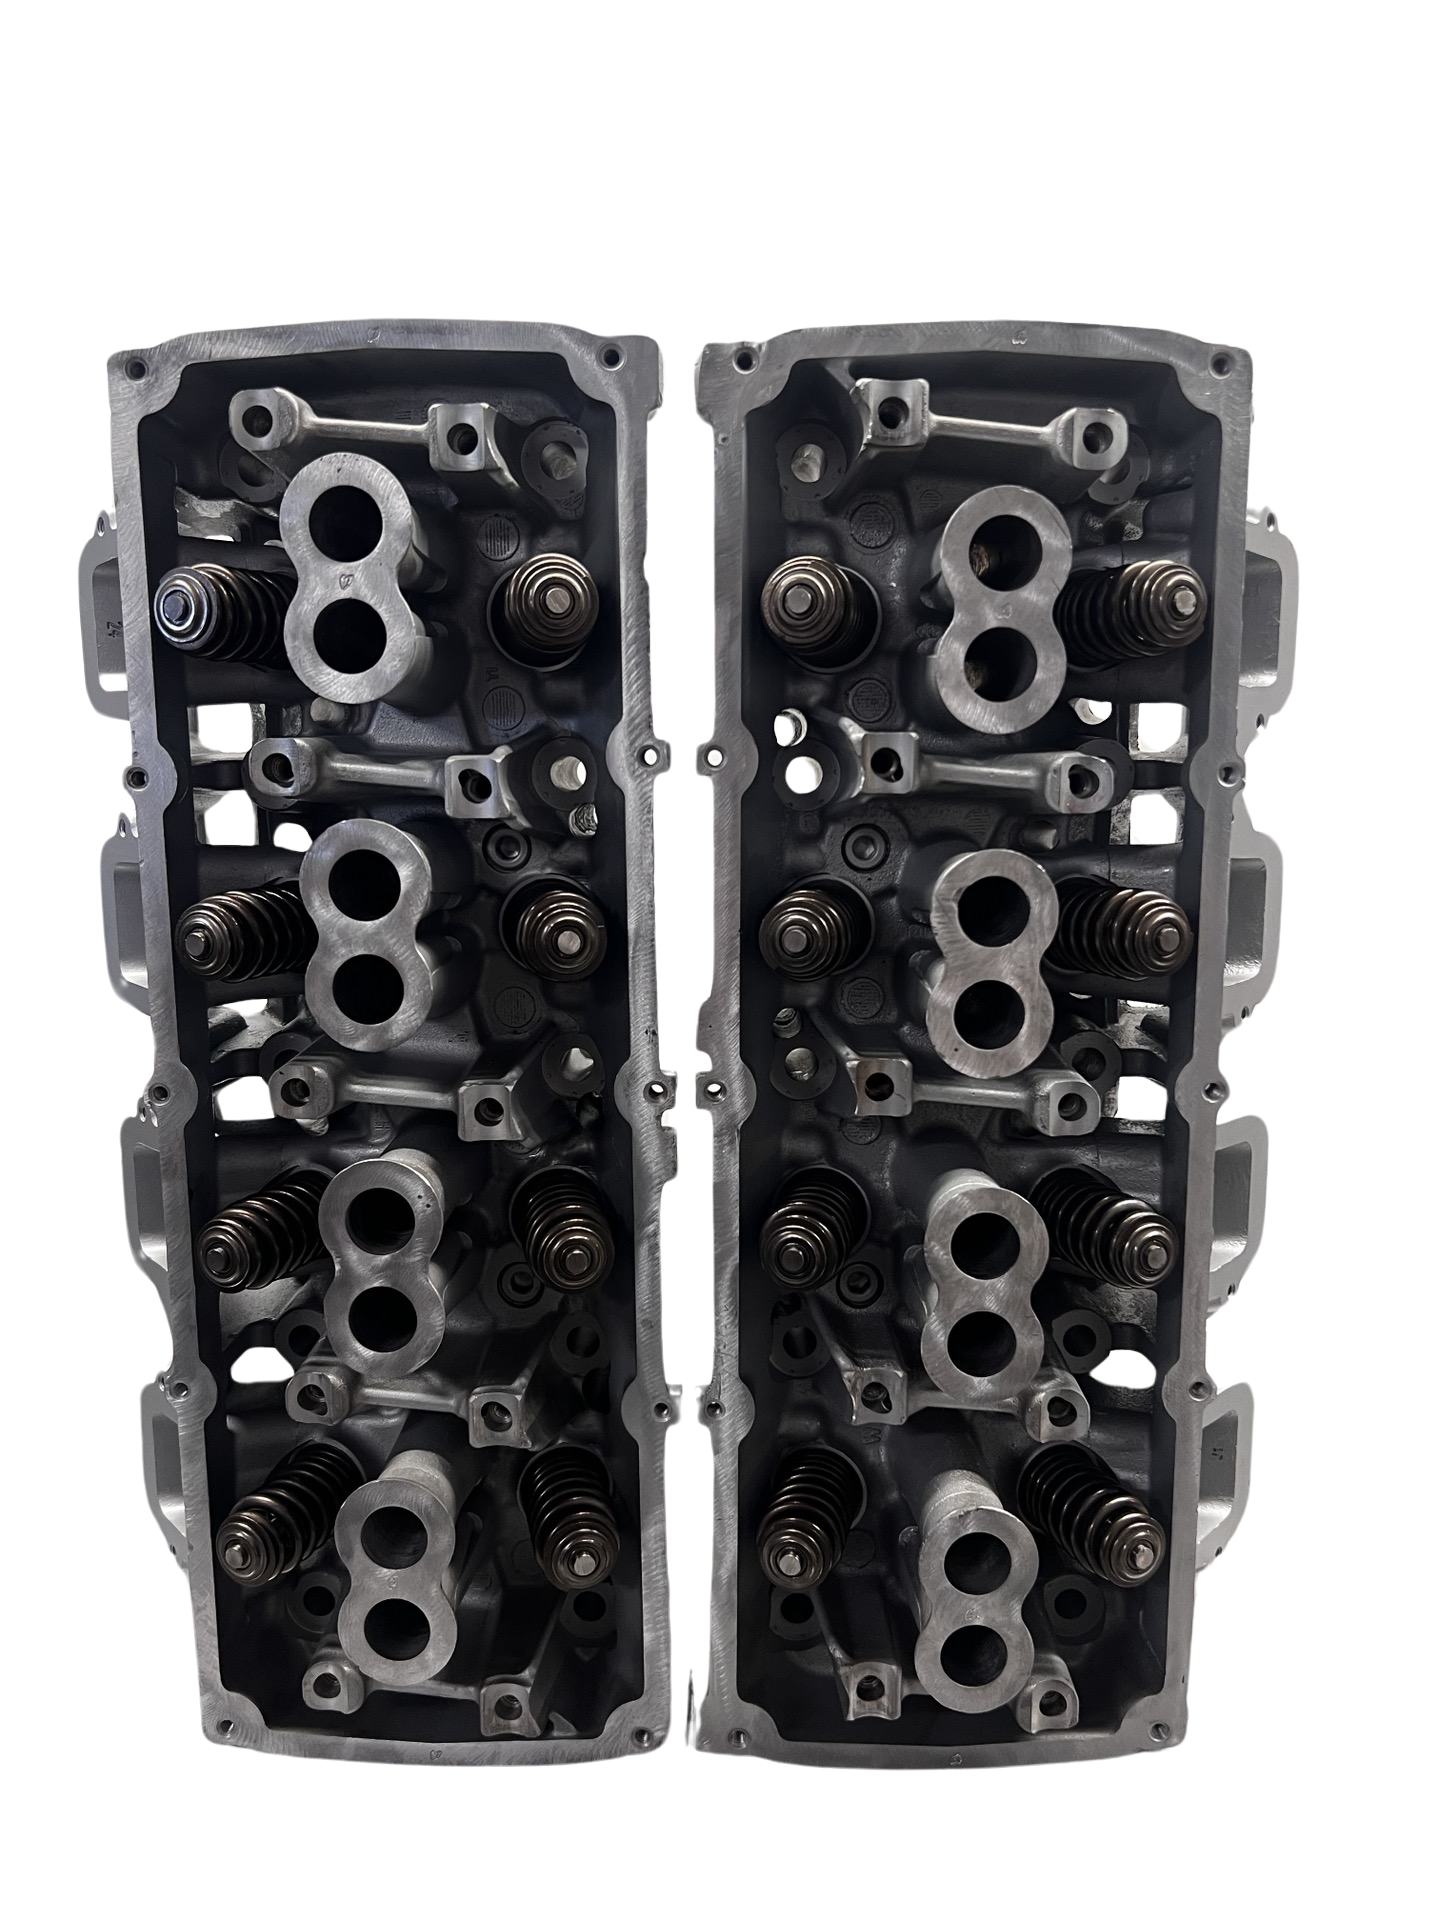 Top view of cylinder heads Chrysler / DODGE Hemi 5.7L Casting #1616DF (SOLD IN PAIR)